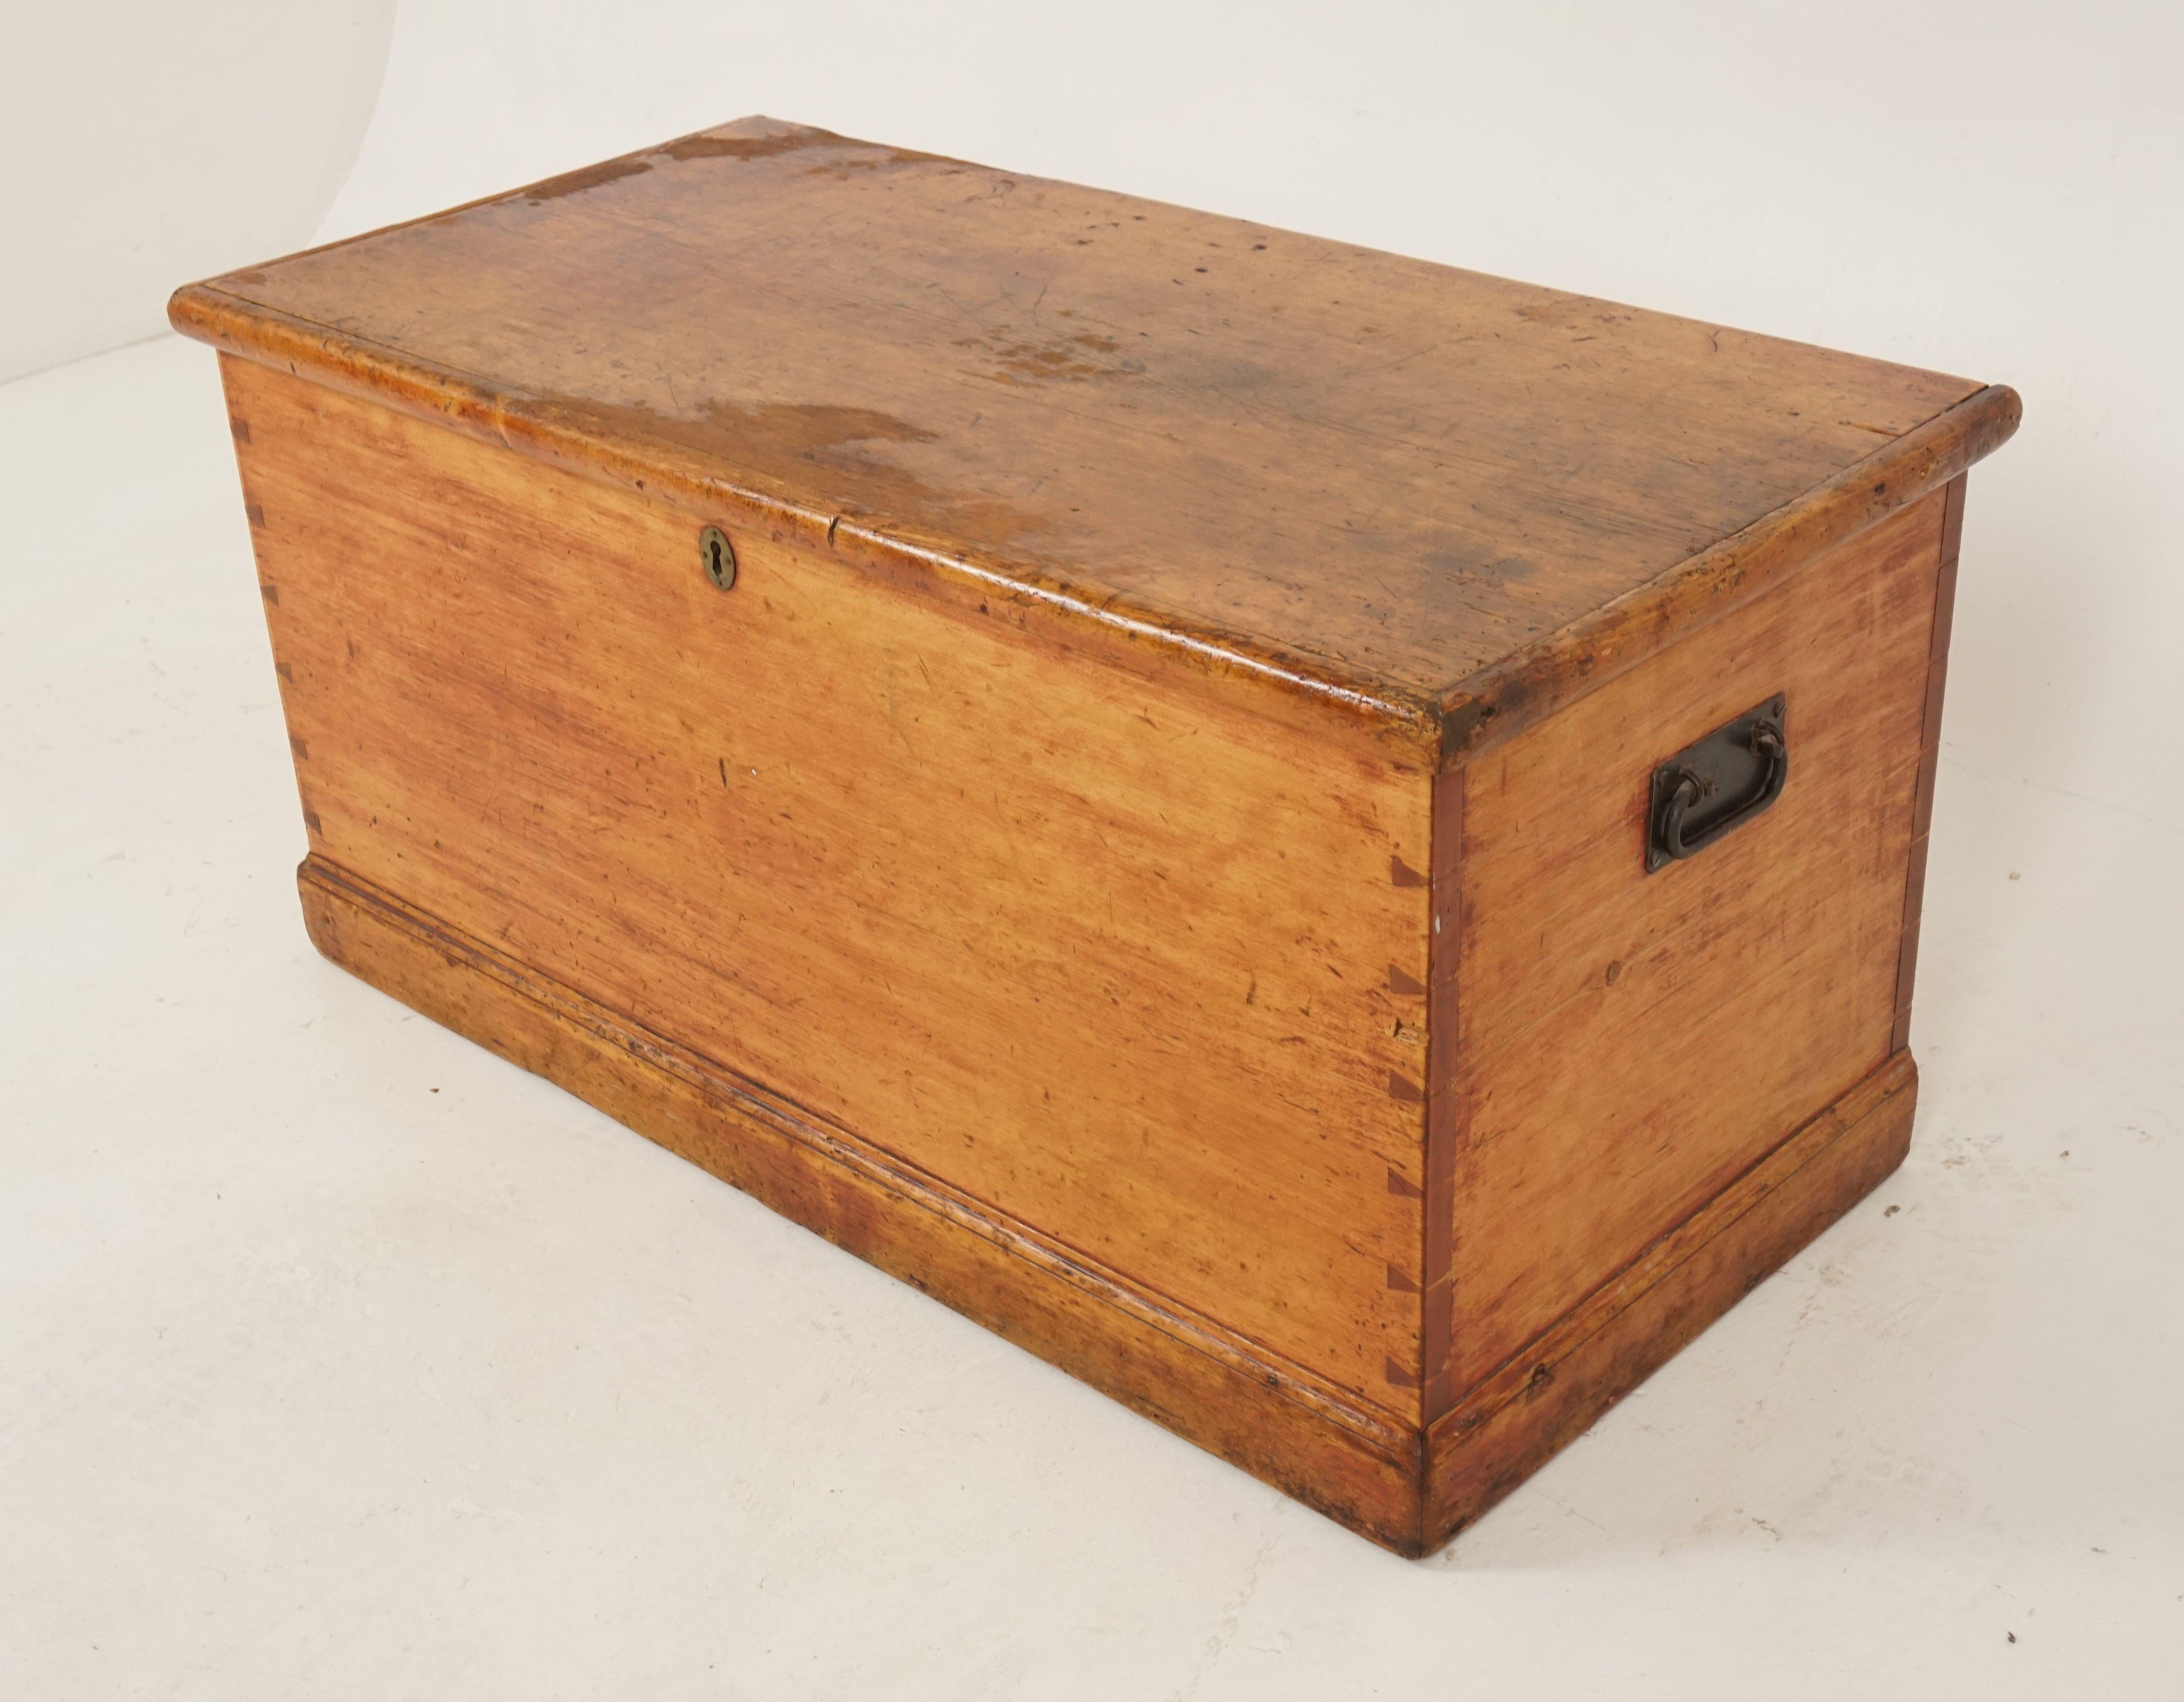 Antique Victorian blanket box, pine toy box, coffee table, Scotland 1880, B2526

Scotland 1880
Solid pine
Original finish
Single plank top with moulded edge
Hinged top with blacksmith made strap hinges
Candle box and a pair of pull out